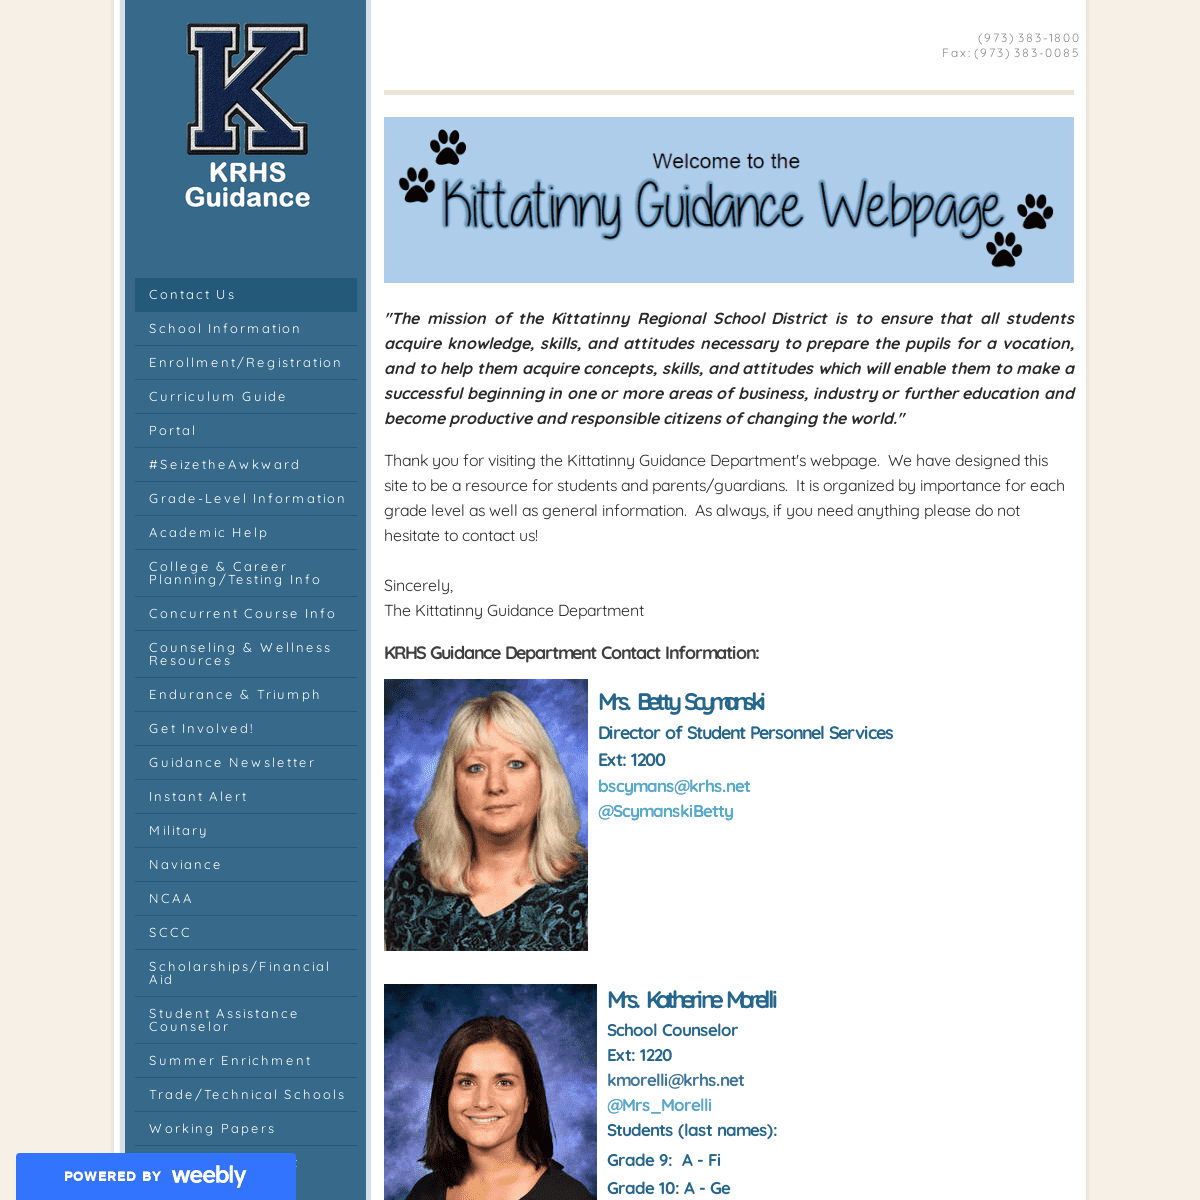 A complete backup of krhsguidance.weebly.com